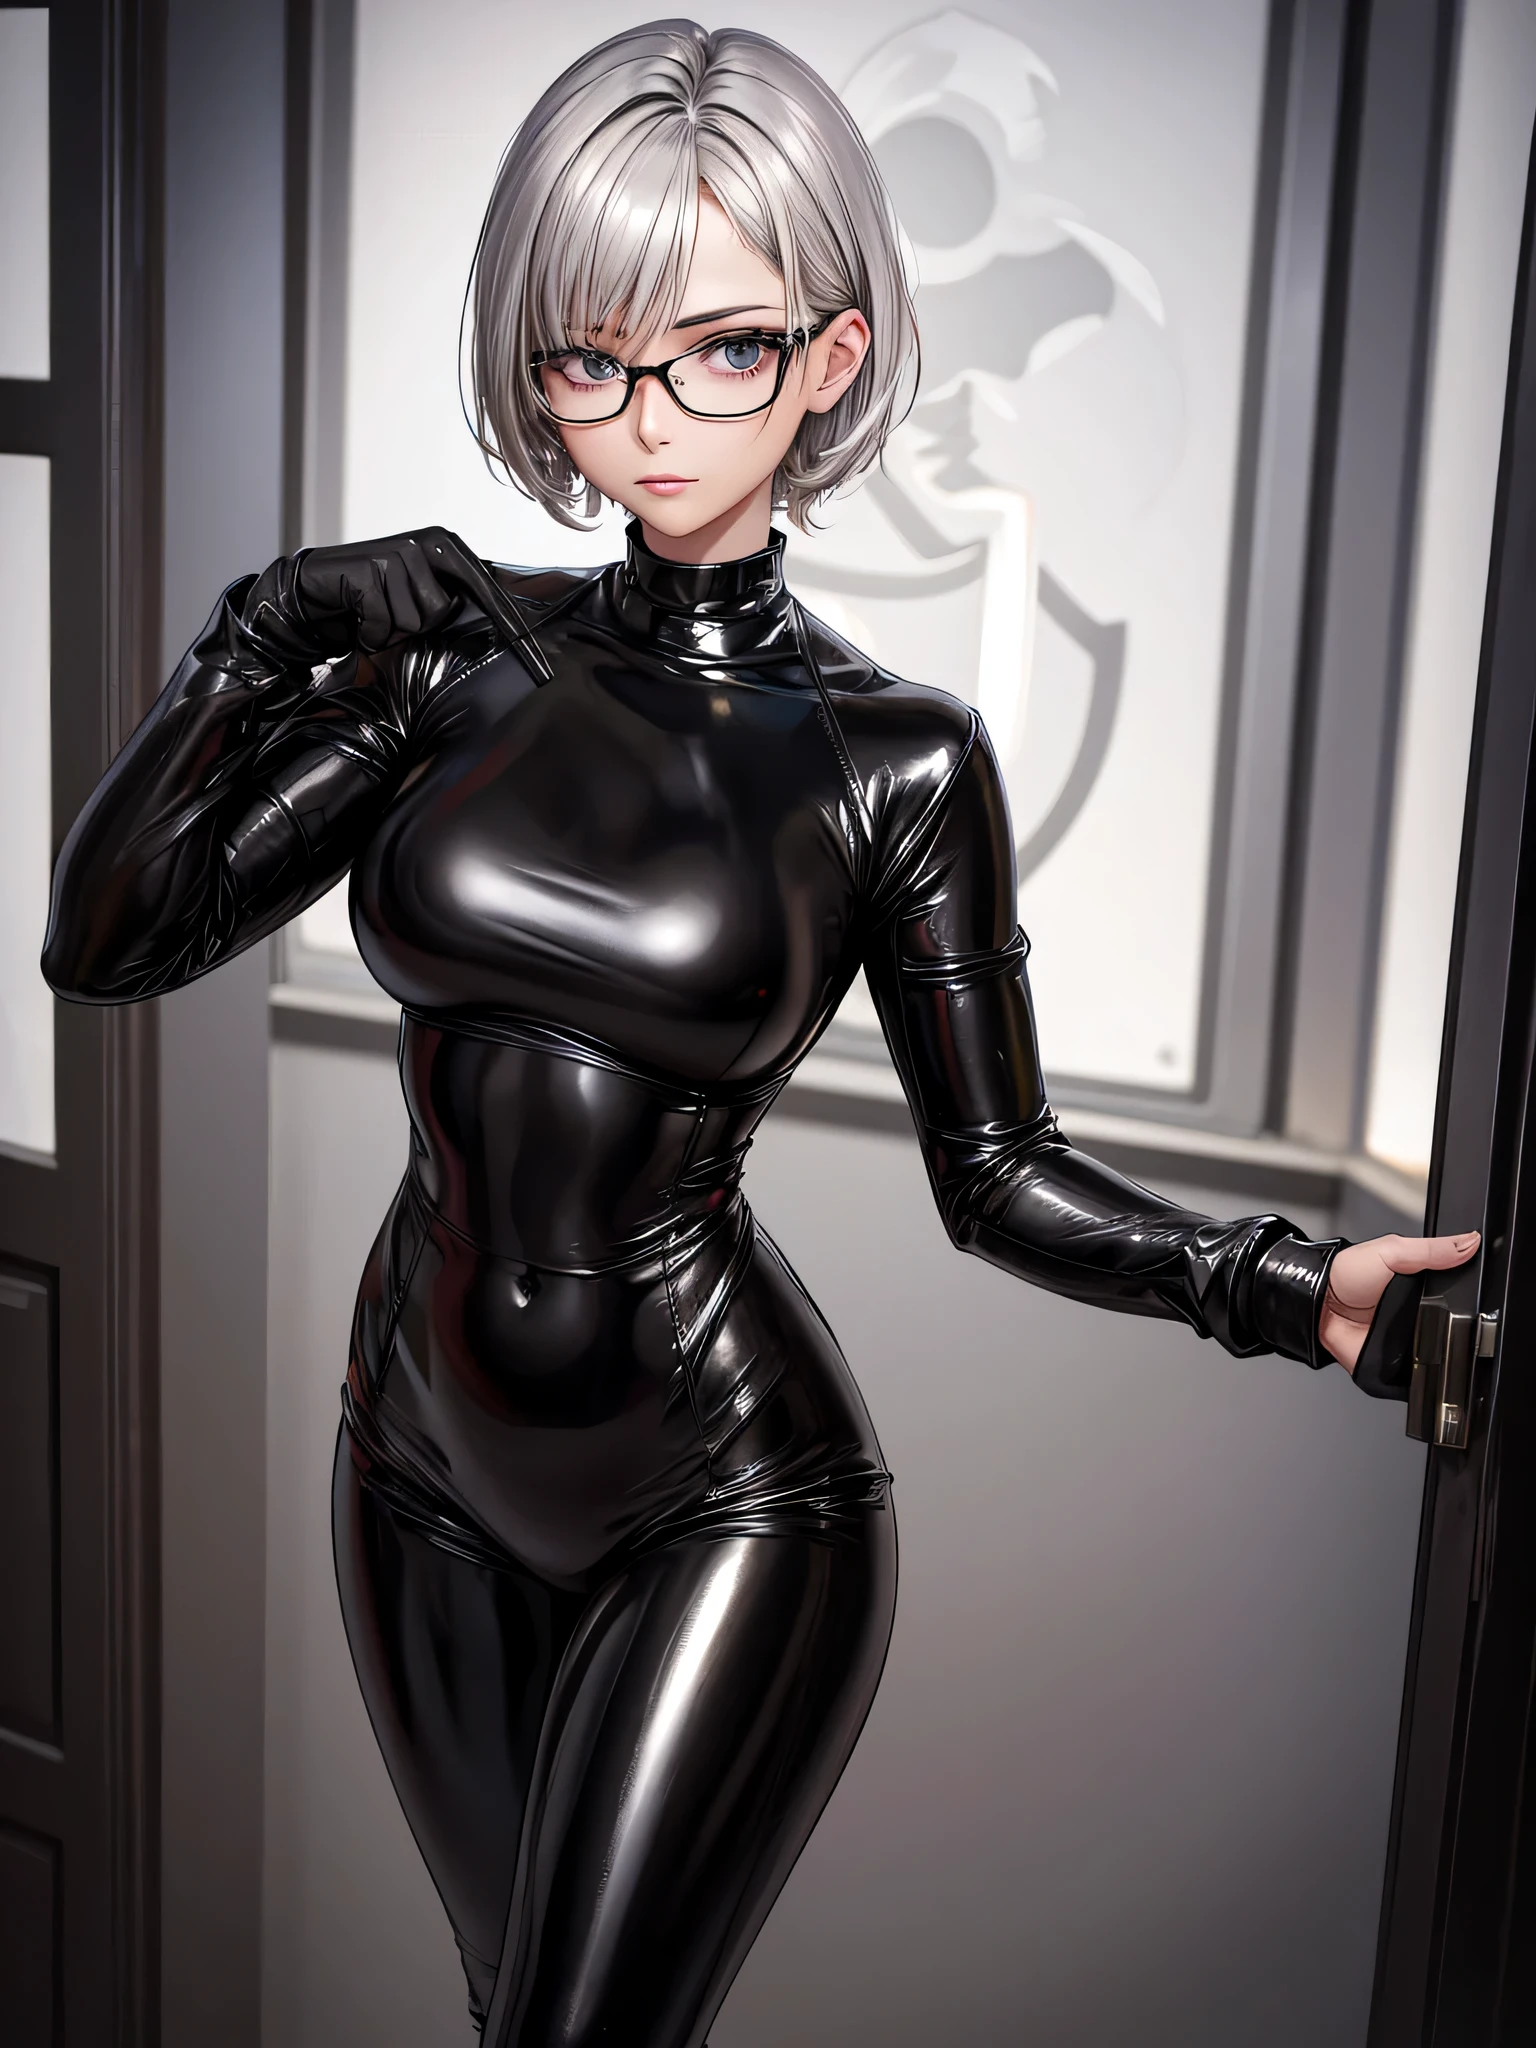 Top quality 8K UHD、Wearing glasses、Beautiful woman with short silver hair wearing a black metallic latex sweatsuit with her hands tied behind her back.、black metallic latex sweatsuit with hidden skin